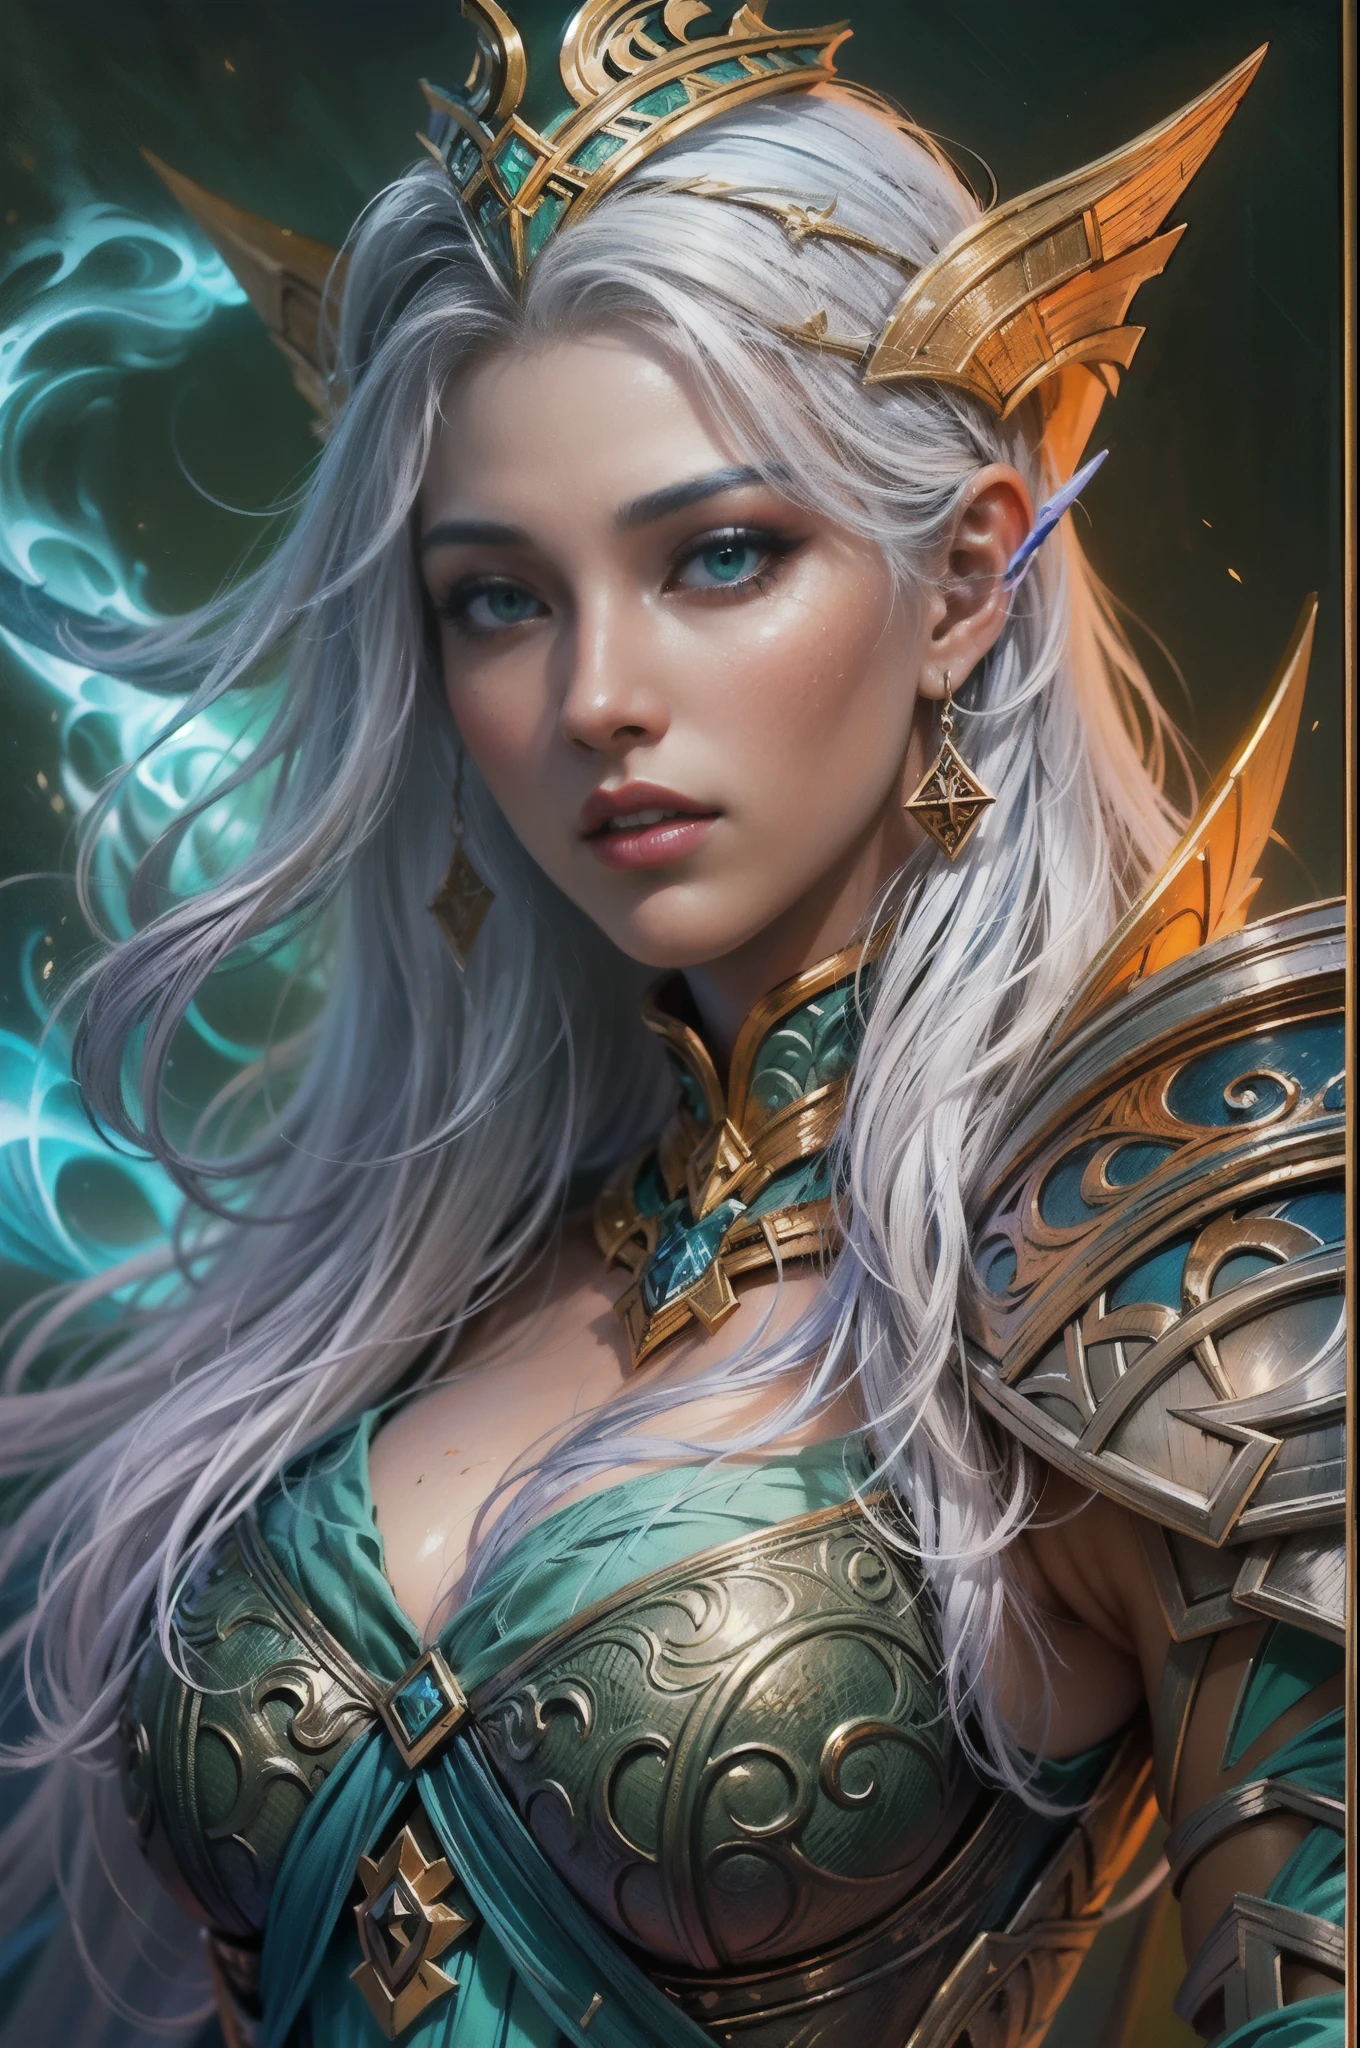 )fantasy art, dnd art, RPG art, wide shot, (masterpiece: 1.4) a (portrait: 1.3) intense details, highly detailed, photorealistic, best quality, highres, portrait a vedalken female (fantasy art, Masterpiece, best quality: 1.3) ((blue skin: 1.5)), intense details facial details, exquisite beauty, (fantasy art, Masterpiece, best quality) cleric, (blue colored skin: 1.5) 1person blue_skin, blue skinned female, (white hair: 1.3), long hair, intense (green: 1.3) eye, fantasy art, Masterpiece, best quality) armed a fiery sword red fire, wearing heavy (white: 1.3) half plate mail armor, wearing high heeled laced boots, wearing an(orange :1.3) cloak, wearing glowing holy symbol GlowingRunes_yellow, within fantasy temple background, reflection light, high details, best quality, 16k, [ultra detailed], masterpiece, best quality, (extremely detailed), close up, ultra wide shot, photorealistic, RAW, fantasy art, dnd art, fantasy art, realistic art,((best quality)), ((masterpiece)), (detailed), perfect face